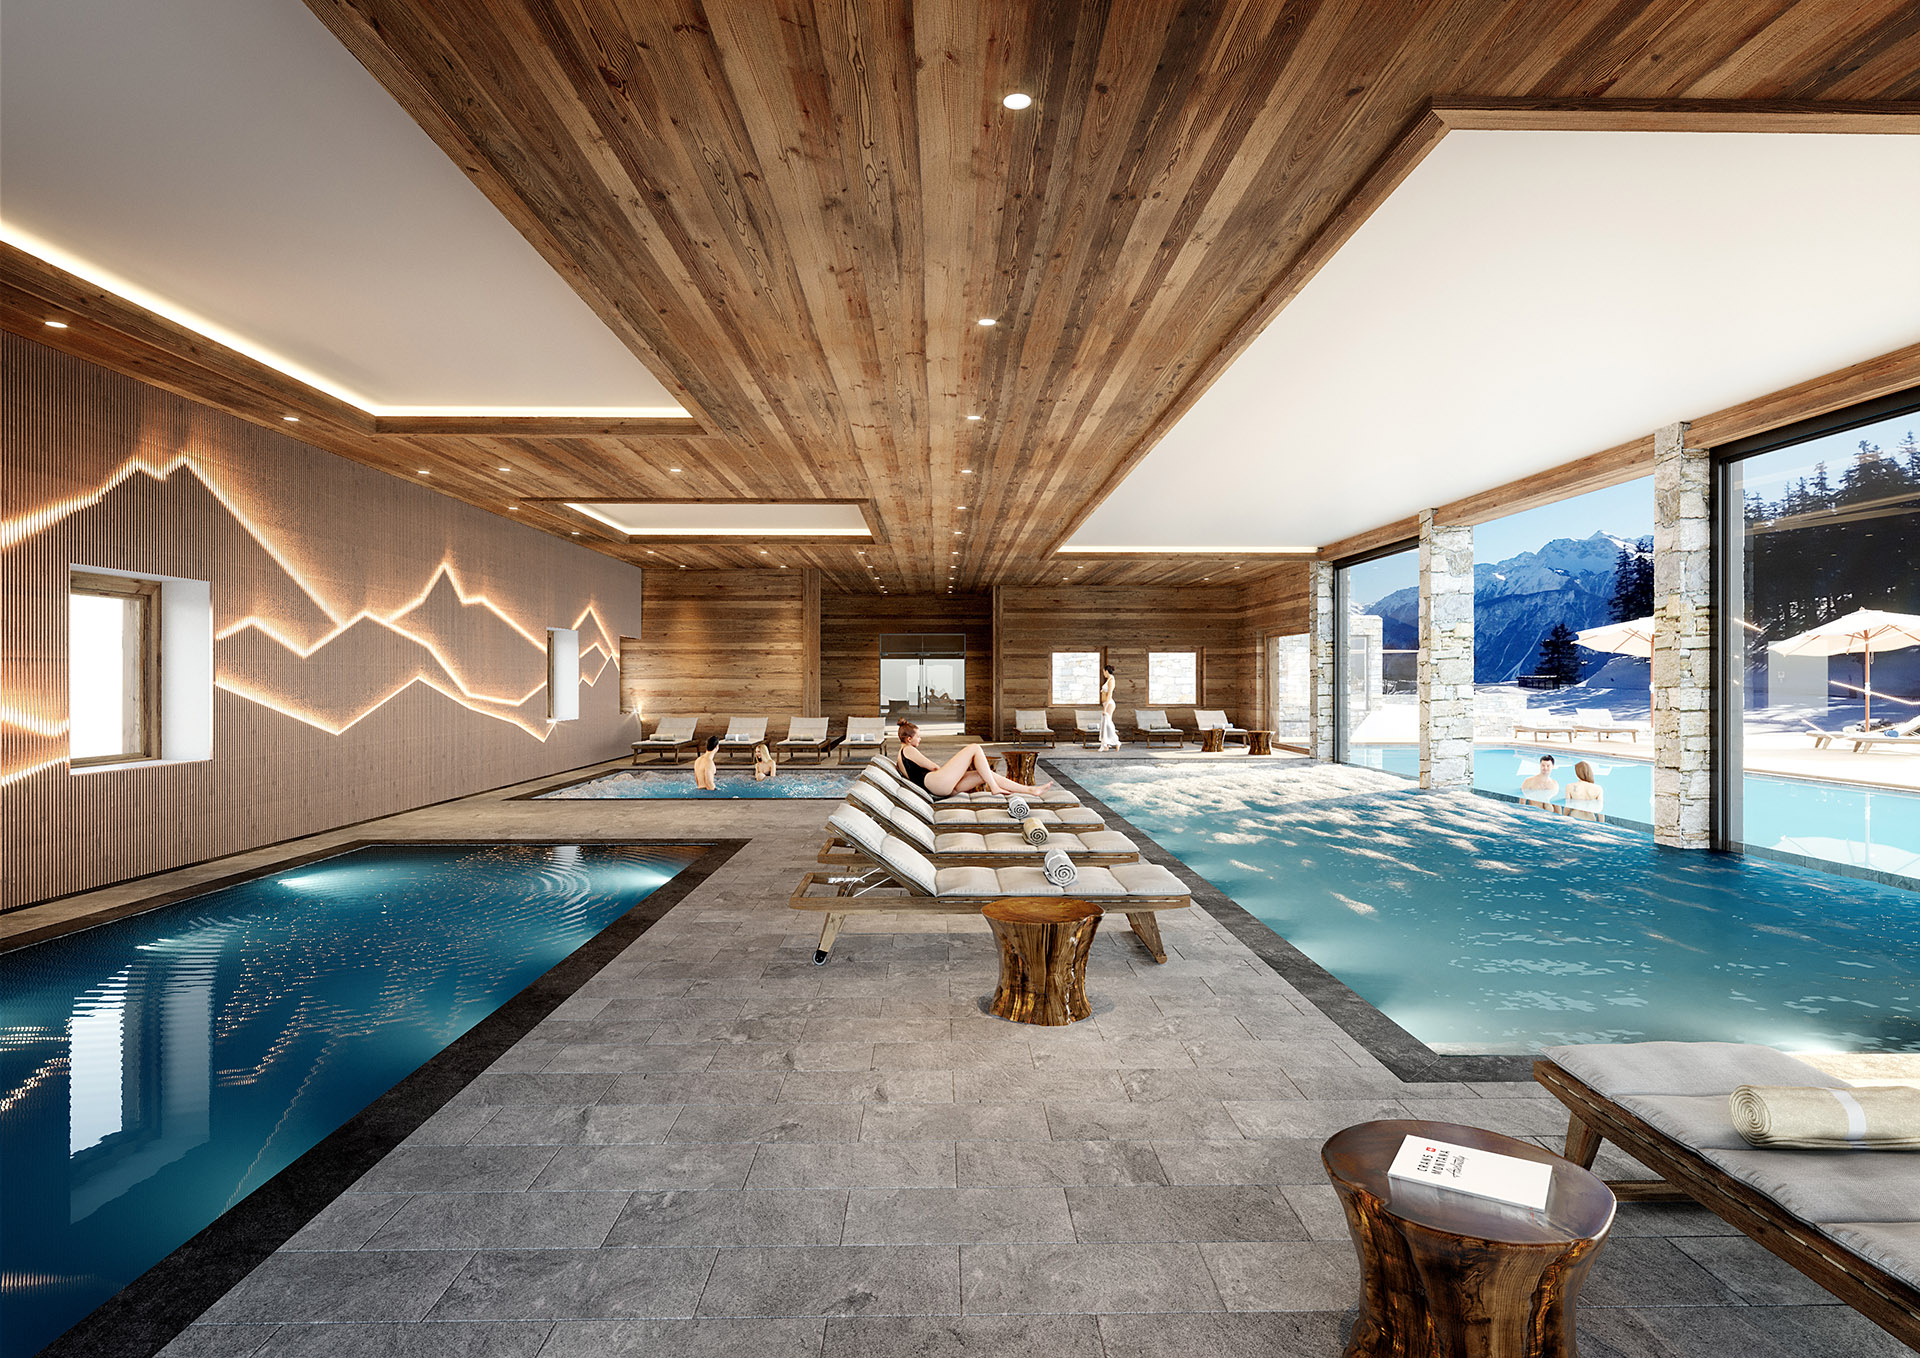 3D image of a spa and a pool inside a chalet, with characters